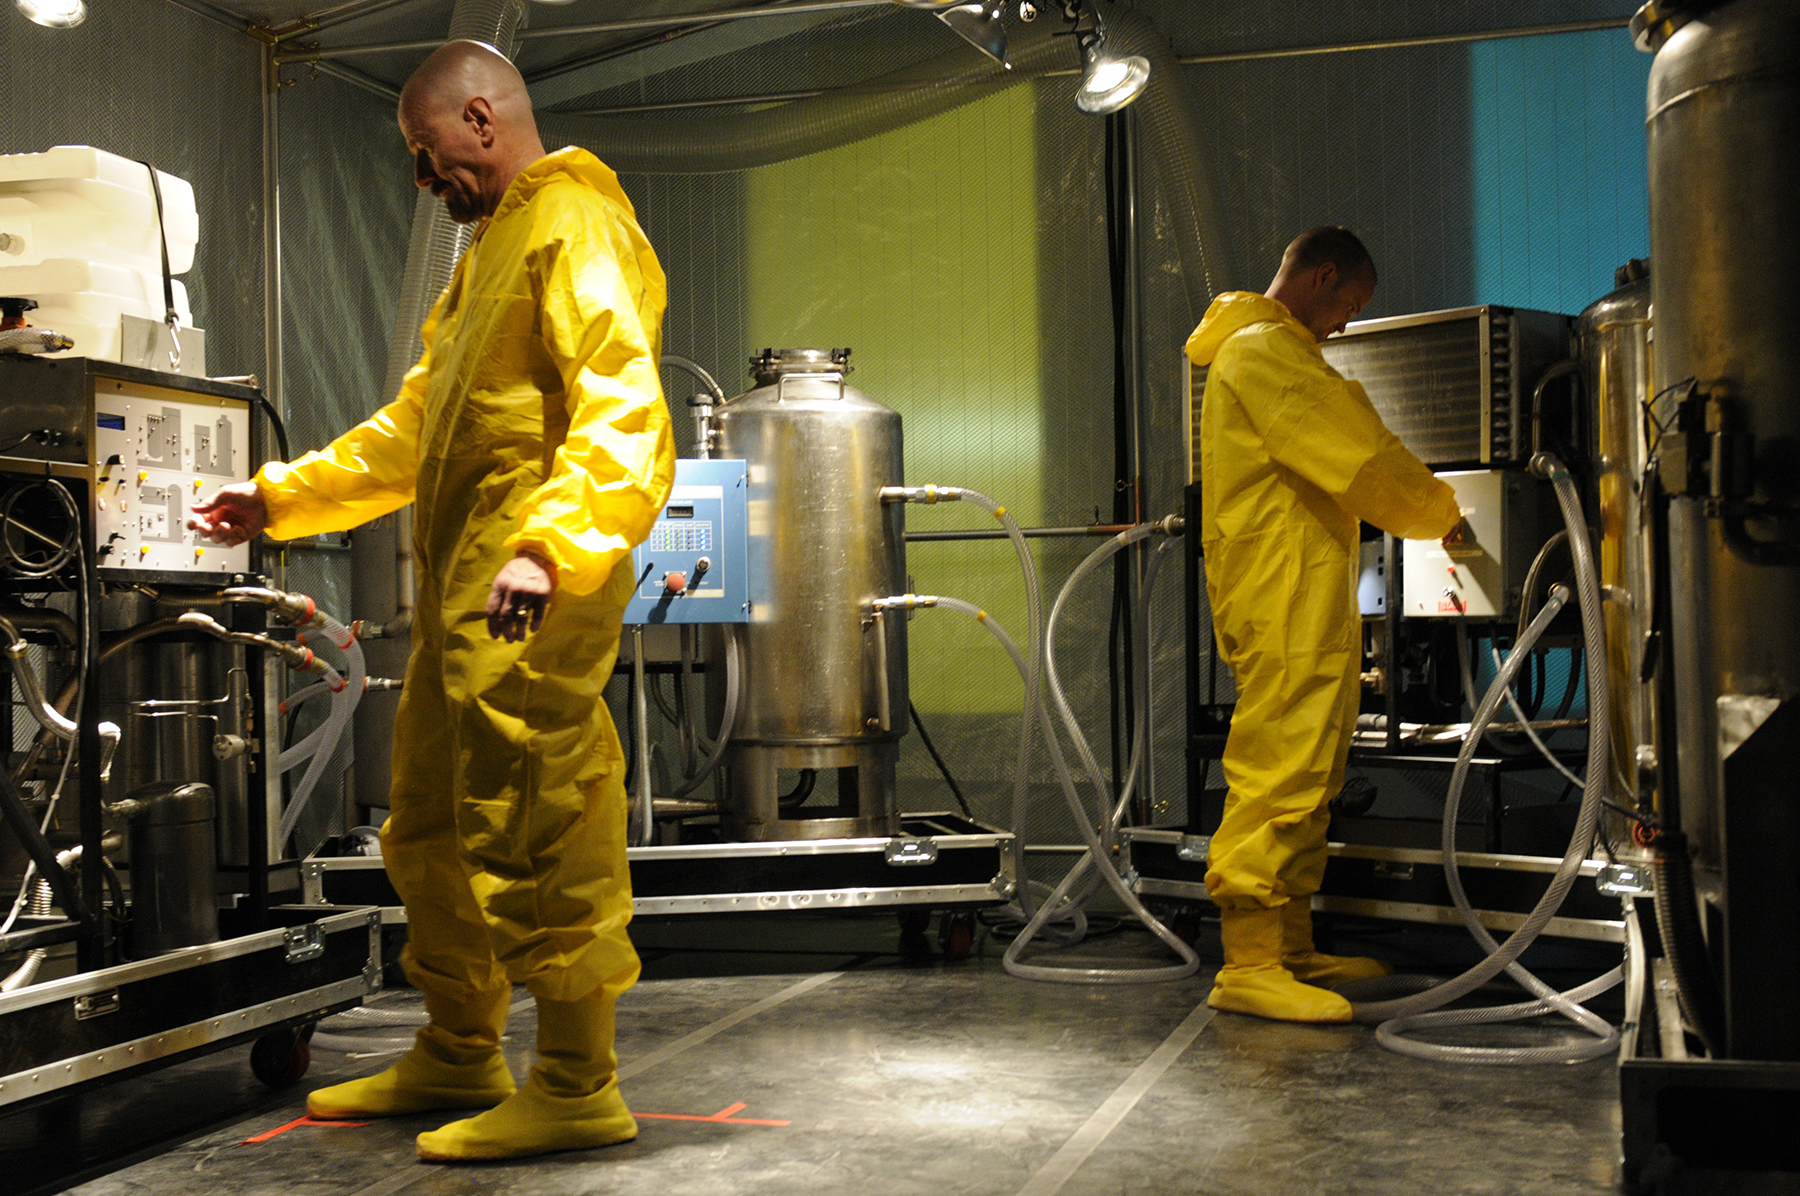 breaking-bad-gets-permanent-display-at-mob-museum-the-mob-museum